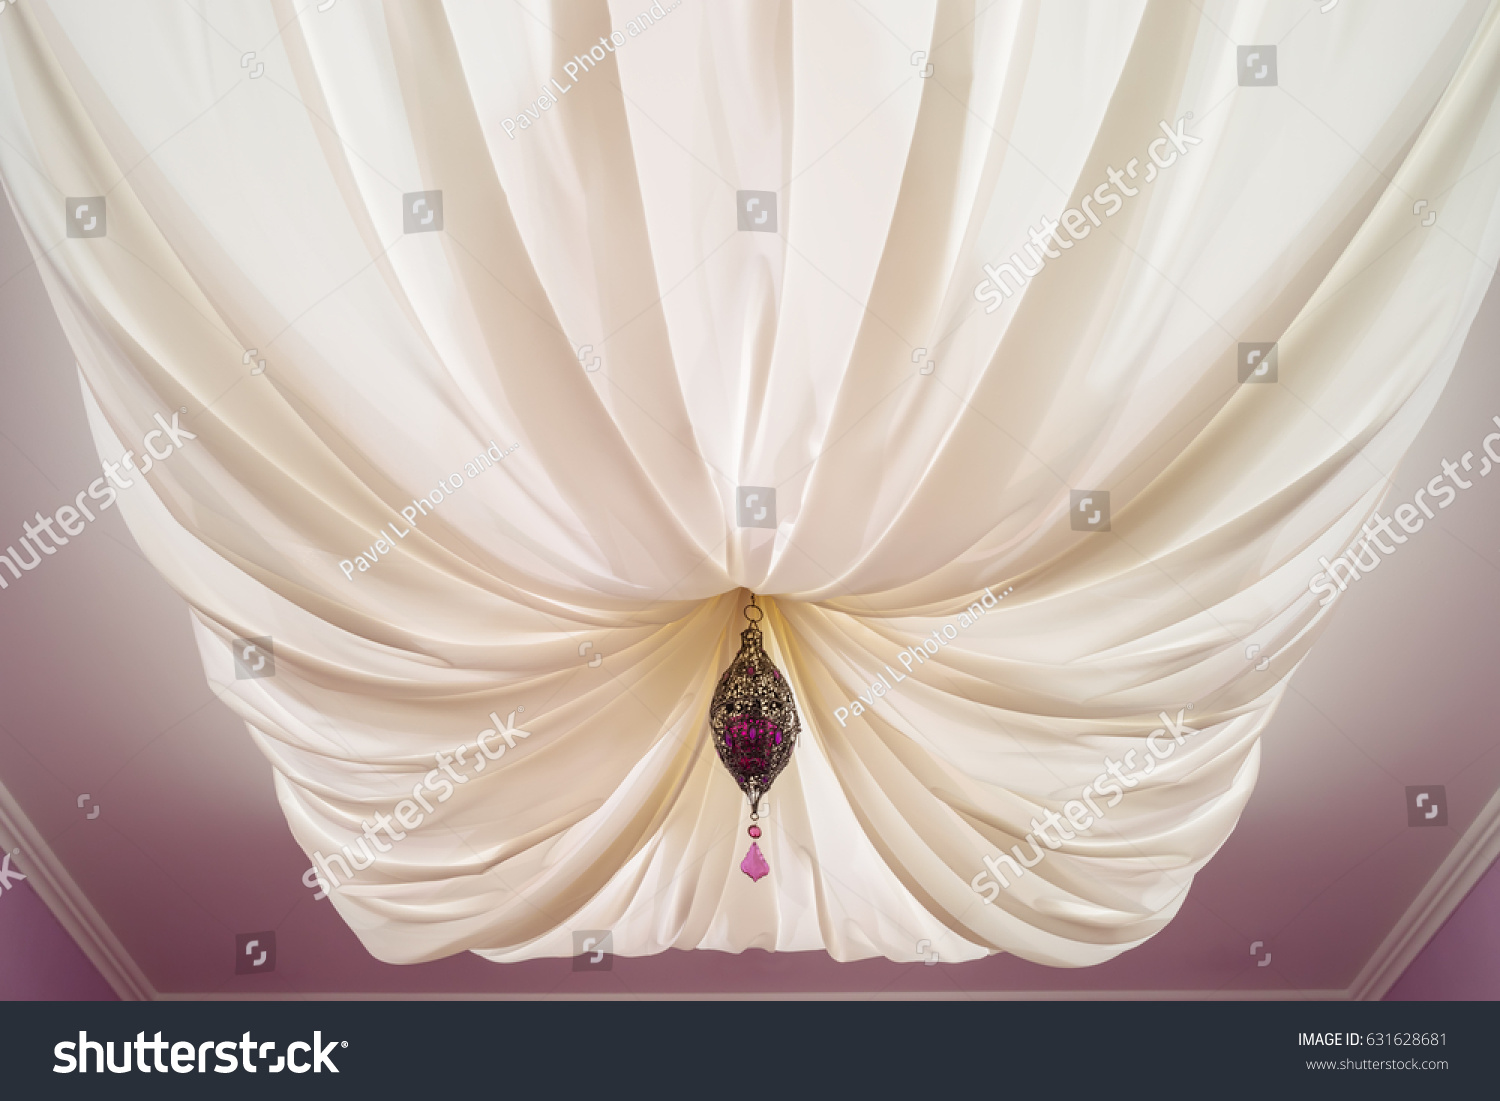 Big White Canopy Hanging Ceiling Ornate Stock Photo Edit Now